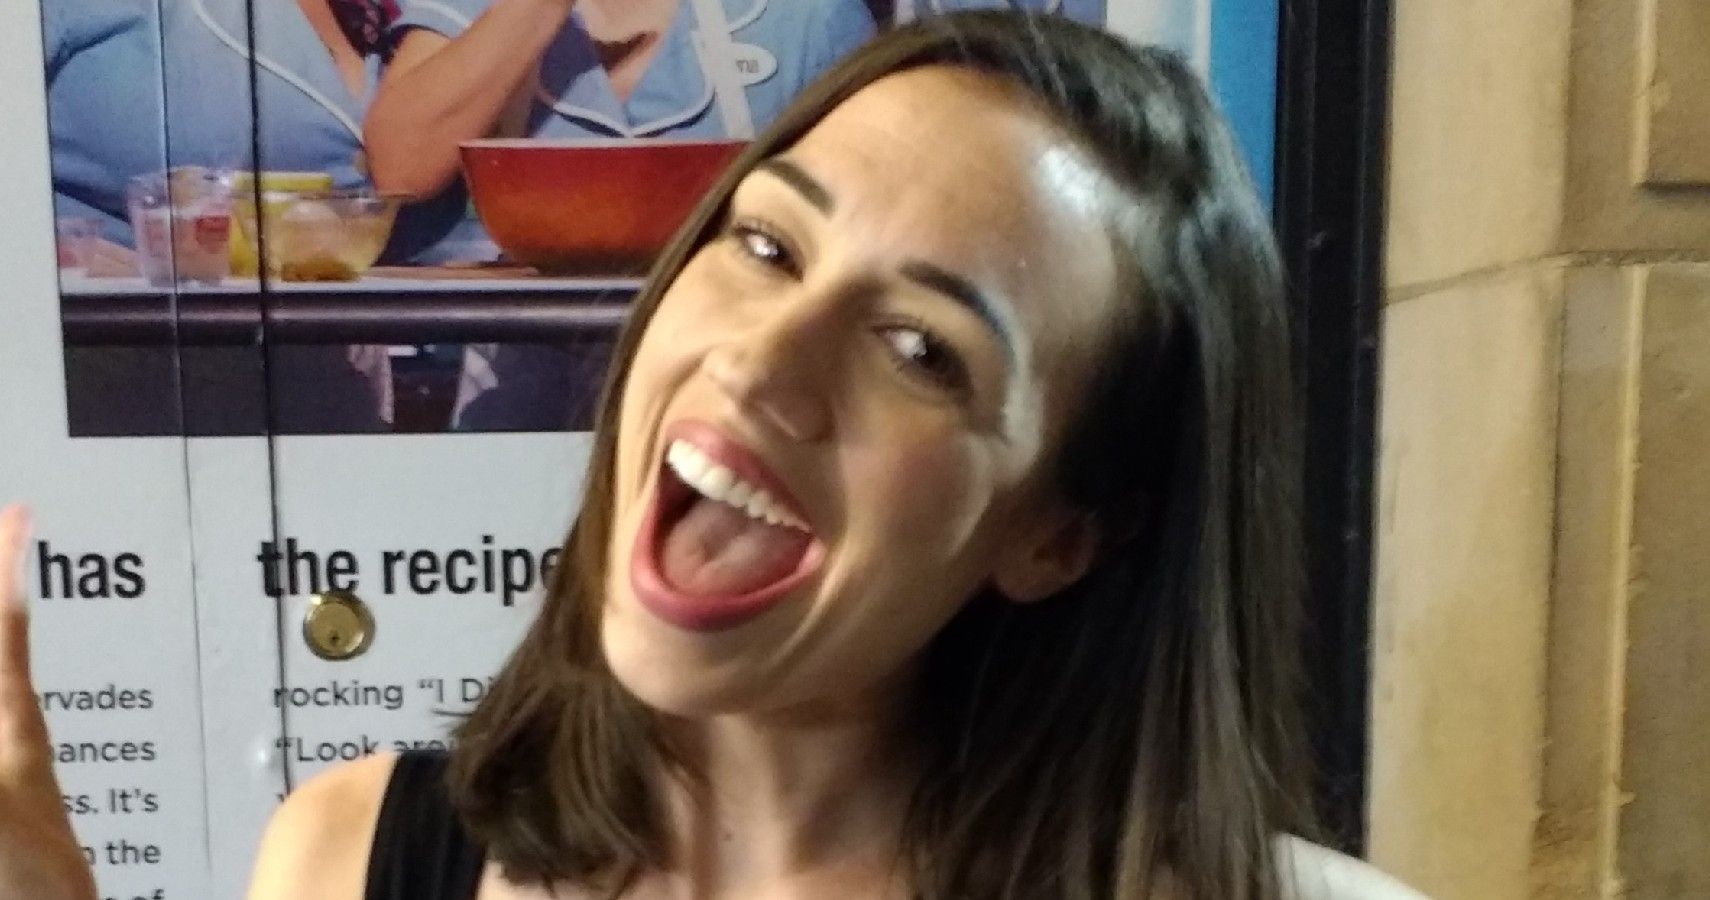 YouTuber Colleen Ballinger Pregnant With Baby No. 2 After Miscarriage